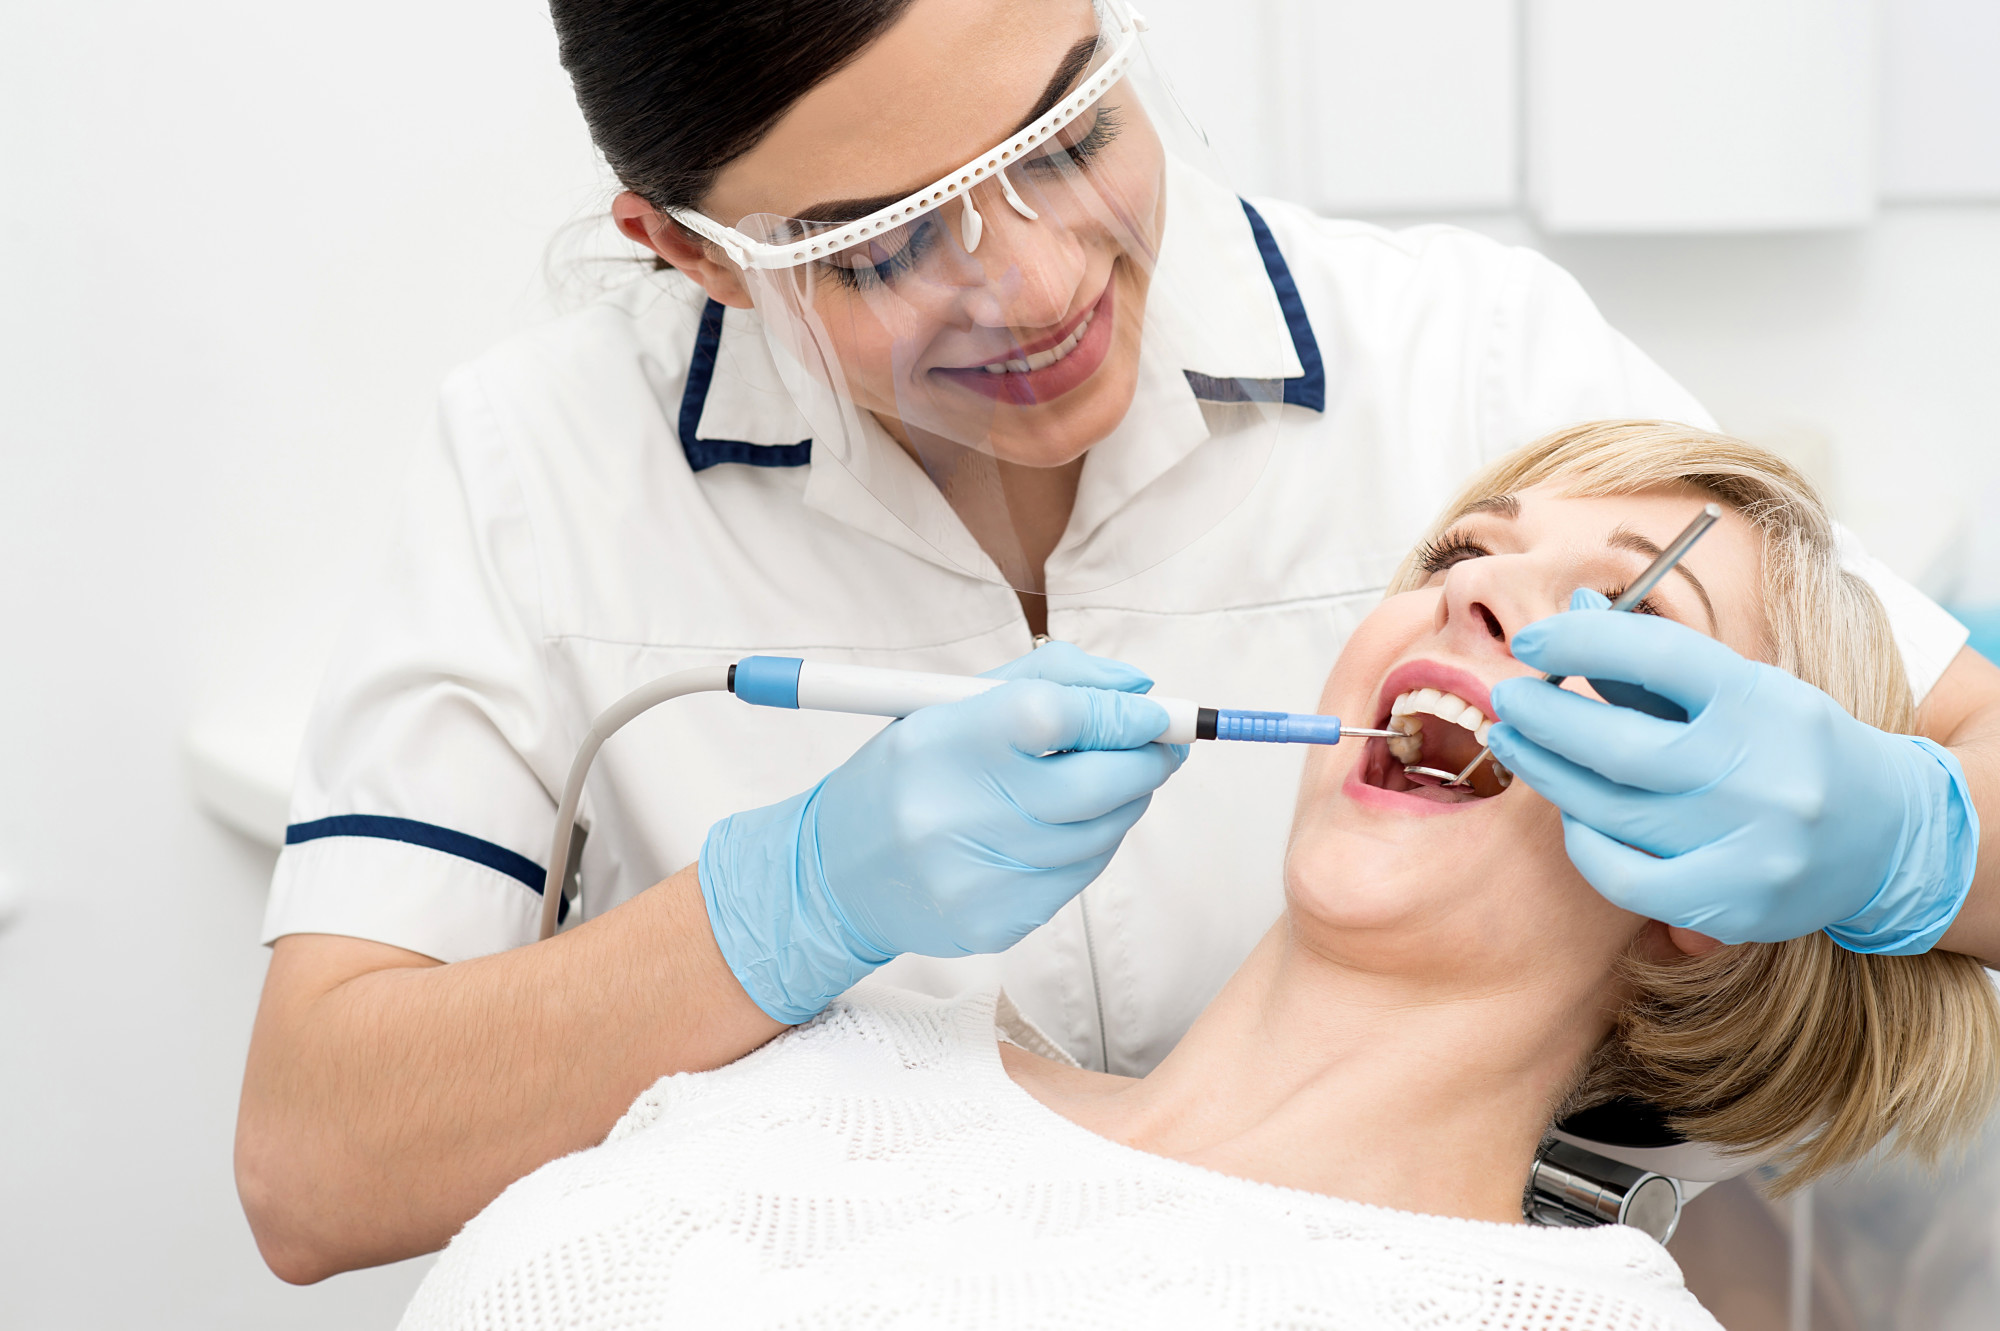 Dental cleanings and overall health are connected in many ways. Learn all about how the two are connected and the importance of dental cleanings.